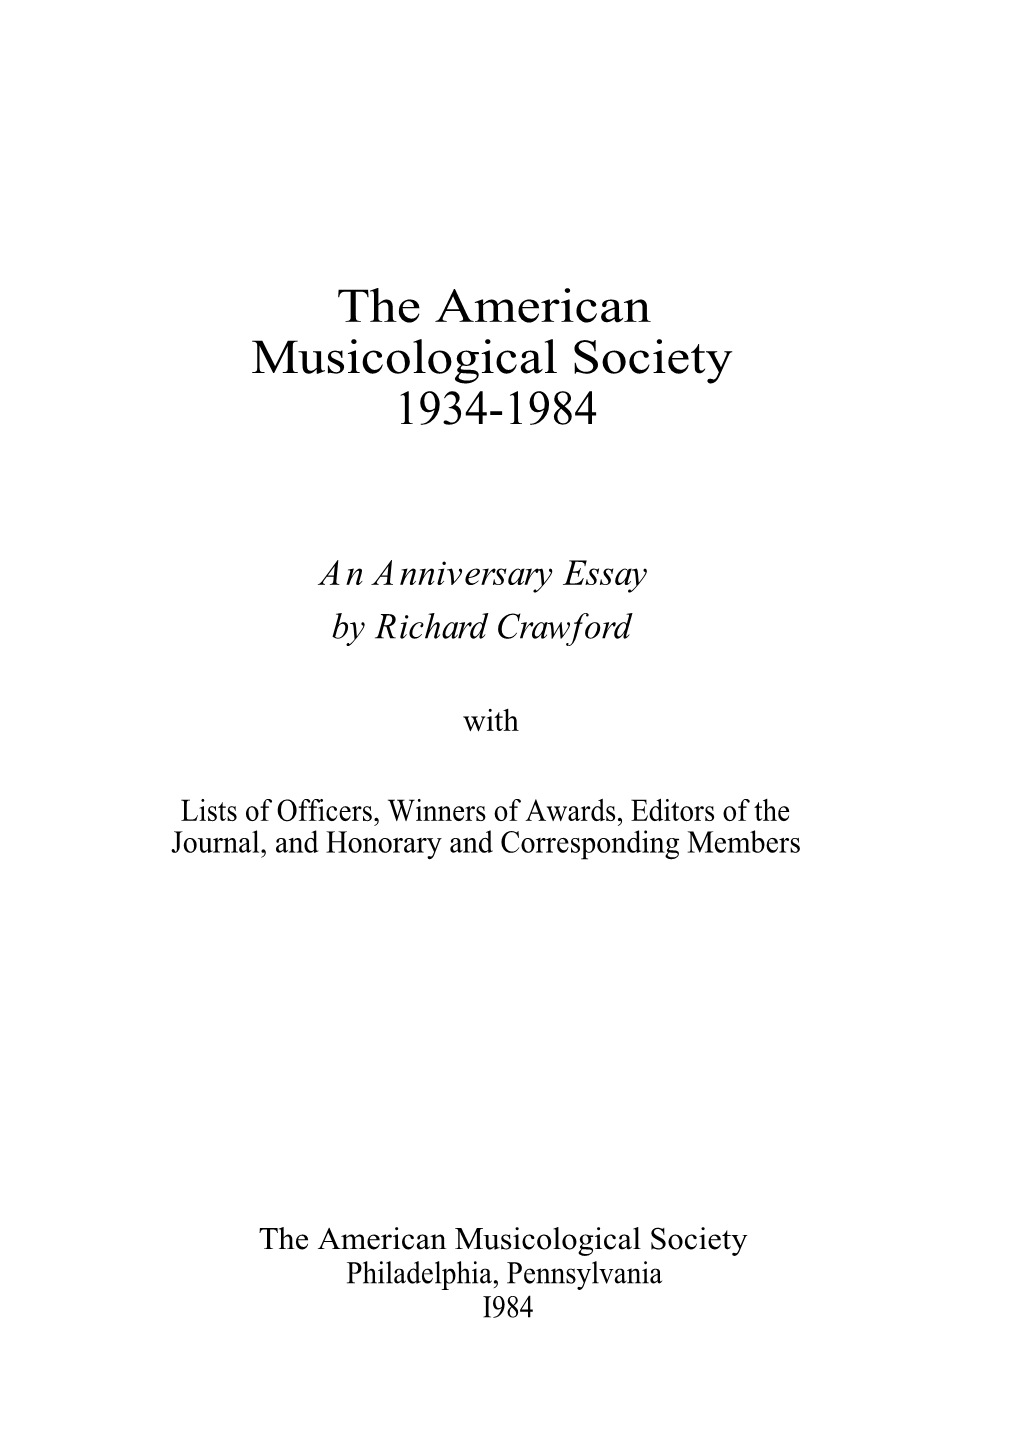 The American Musicological Society 1934-1984